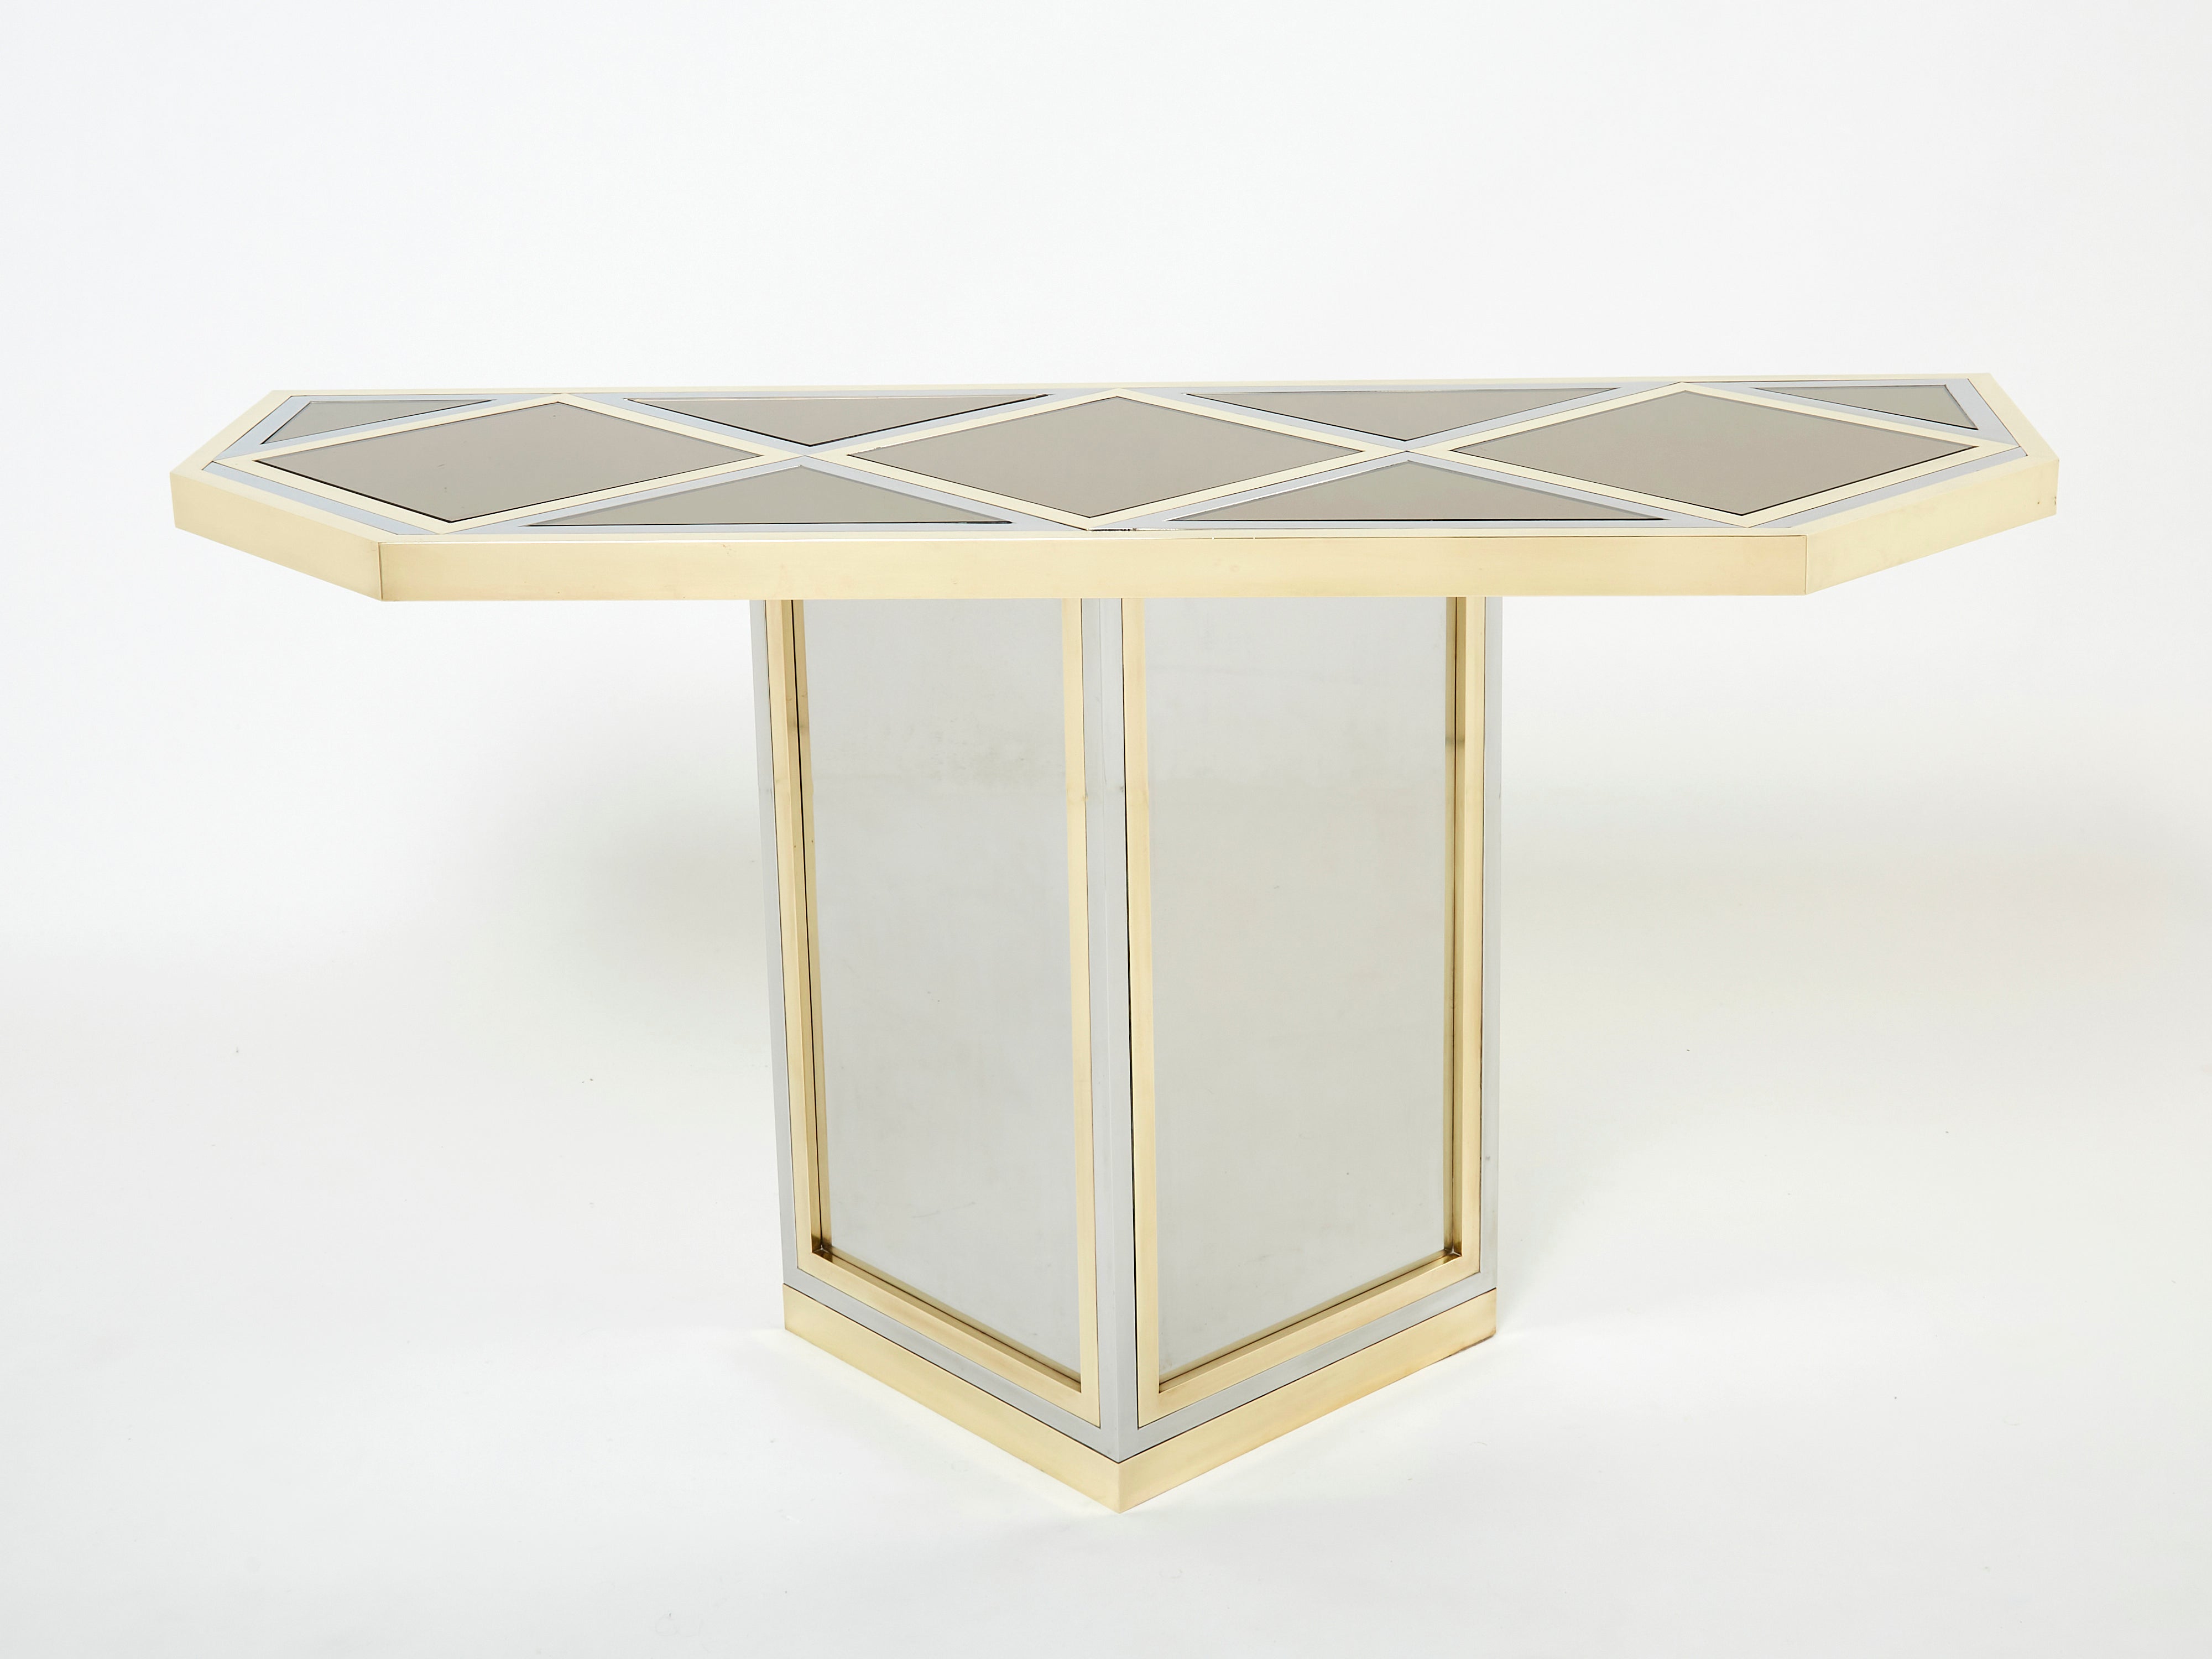 Brass chrome steel mirrored console table by Romeo Rega 1970s